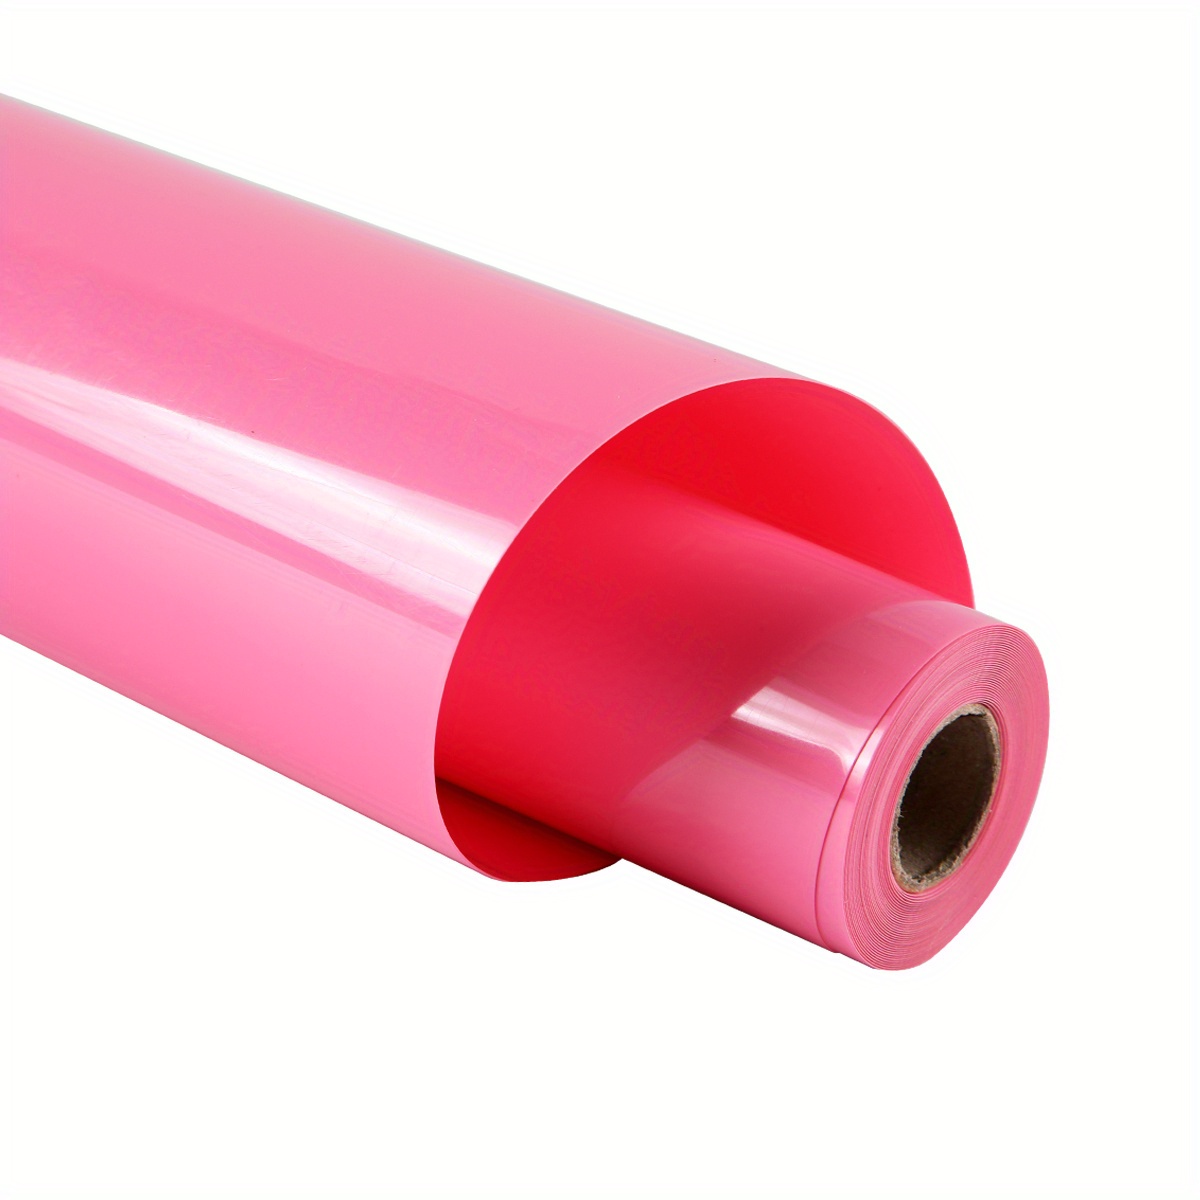 guangyintong HTV Vinyl Rolls Heat Transfer Vinyl - 12 x 40ft Pink HTV  Vinyl for Shirts, Iron on Vinyl for All Cutter Machine - Easy to Cut & Weed  for